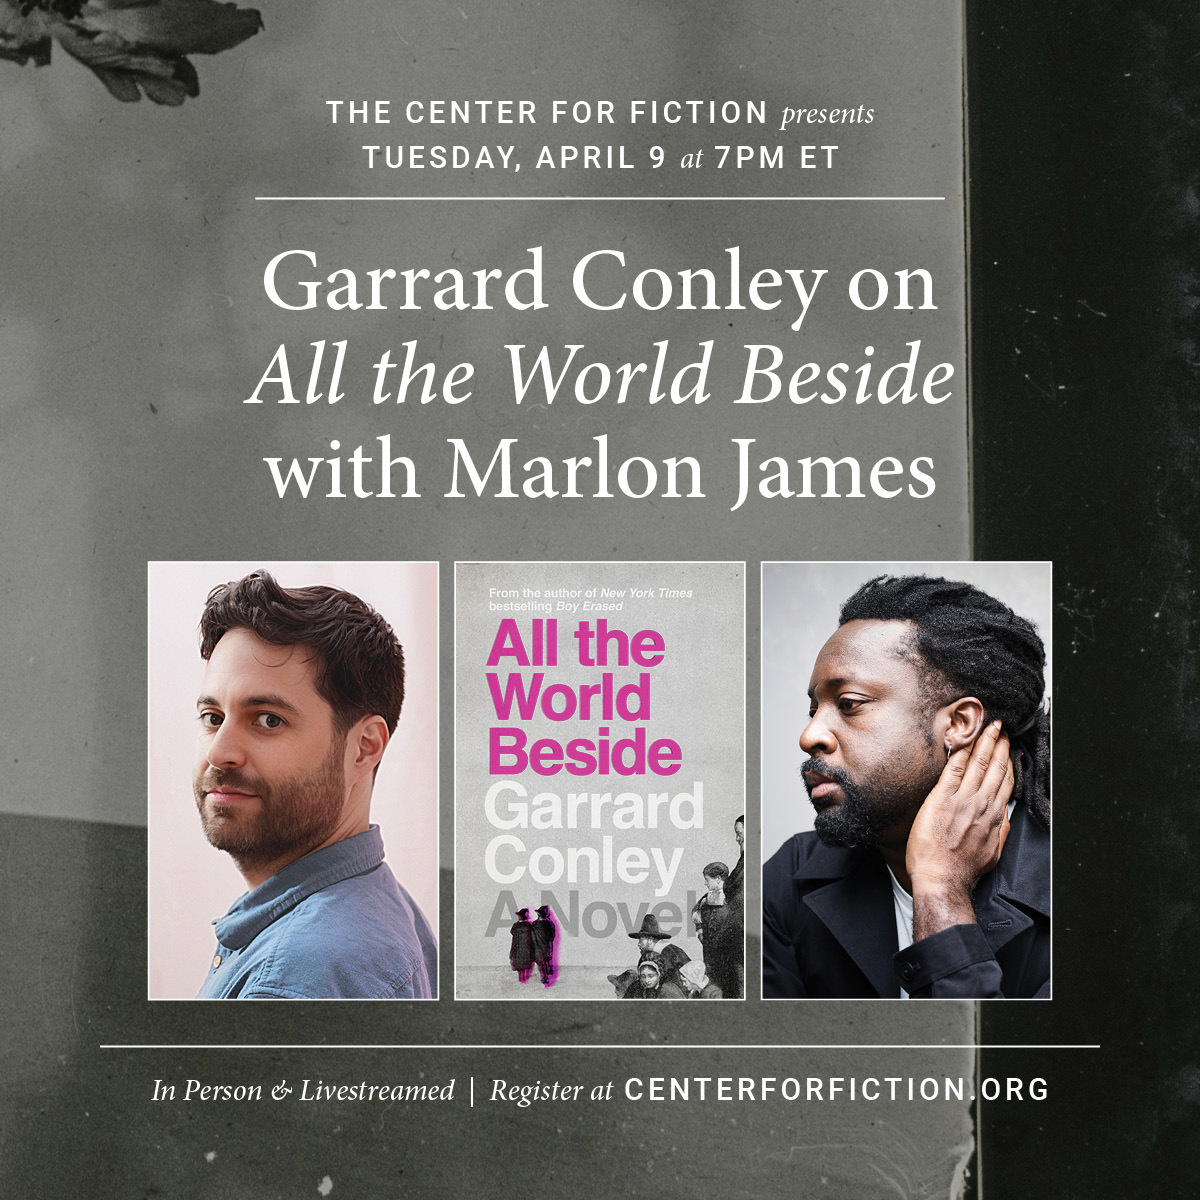 Join us April 9th to celebrate Garrard Conley's debut novel, All the World Beside, with Marlon James! Known for his electrifying memoir Boy Erased, Conley’s latest work is a deeply moving queer love story set in Puritan New England. Get your ticket here: tinyurl.com/25k2rjph